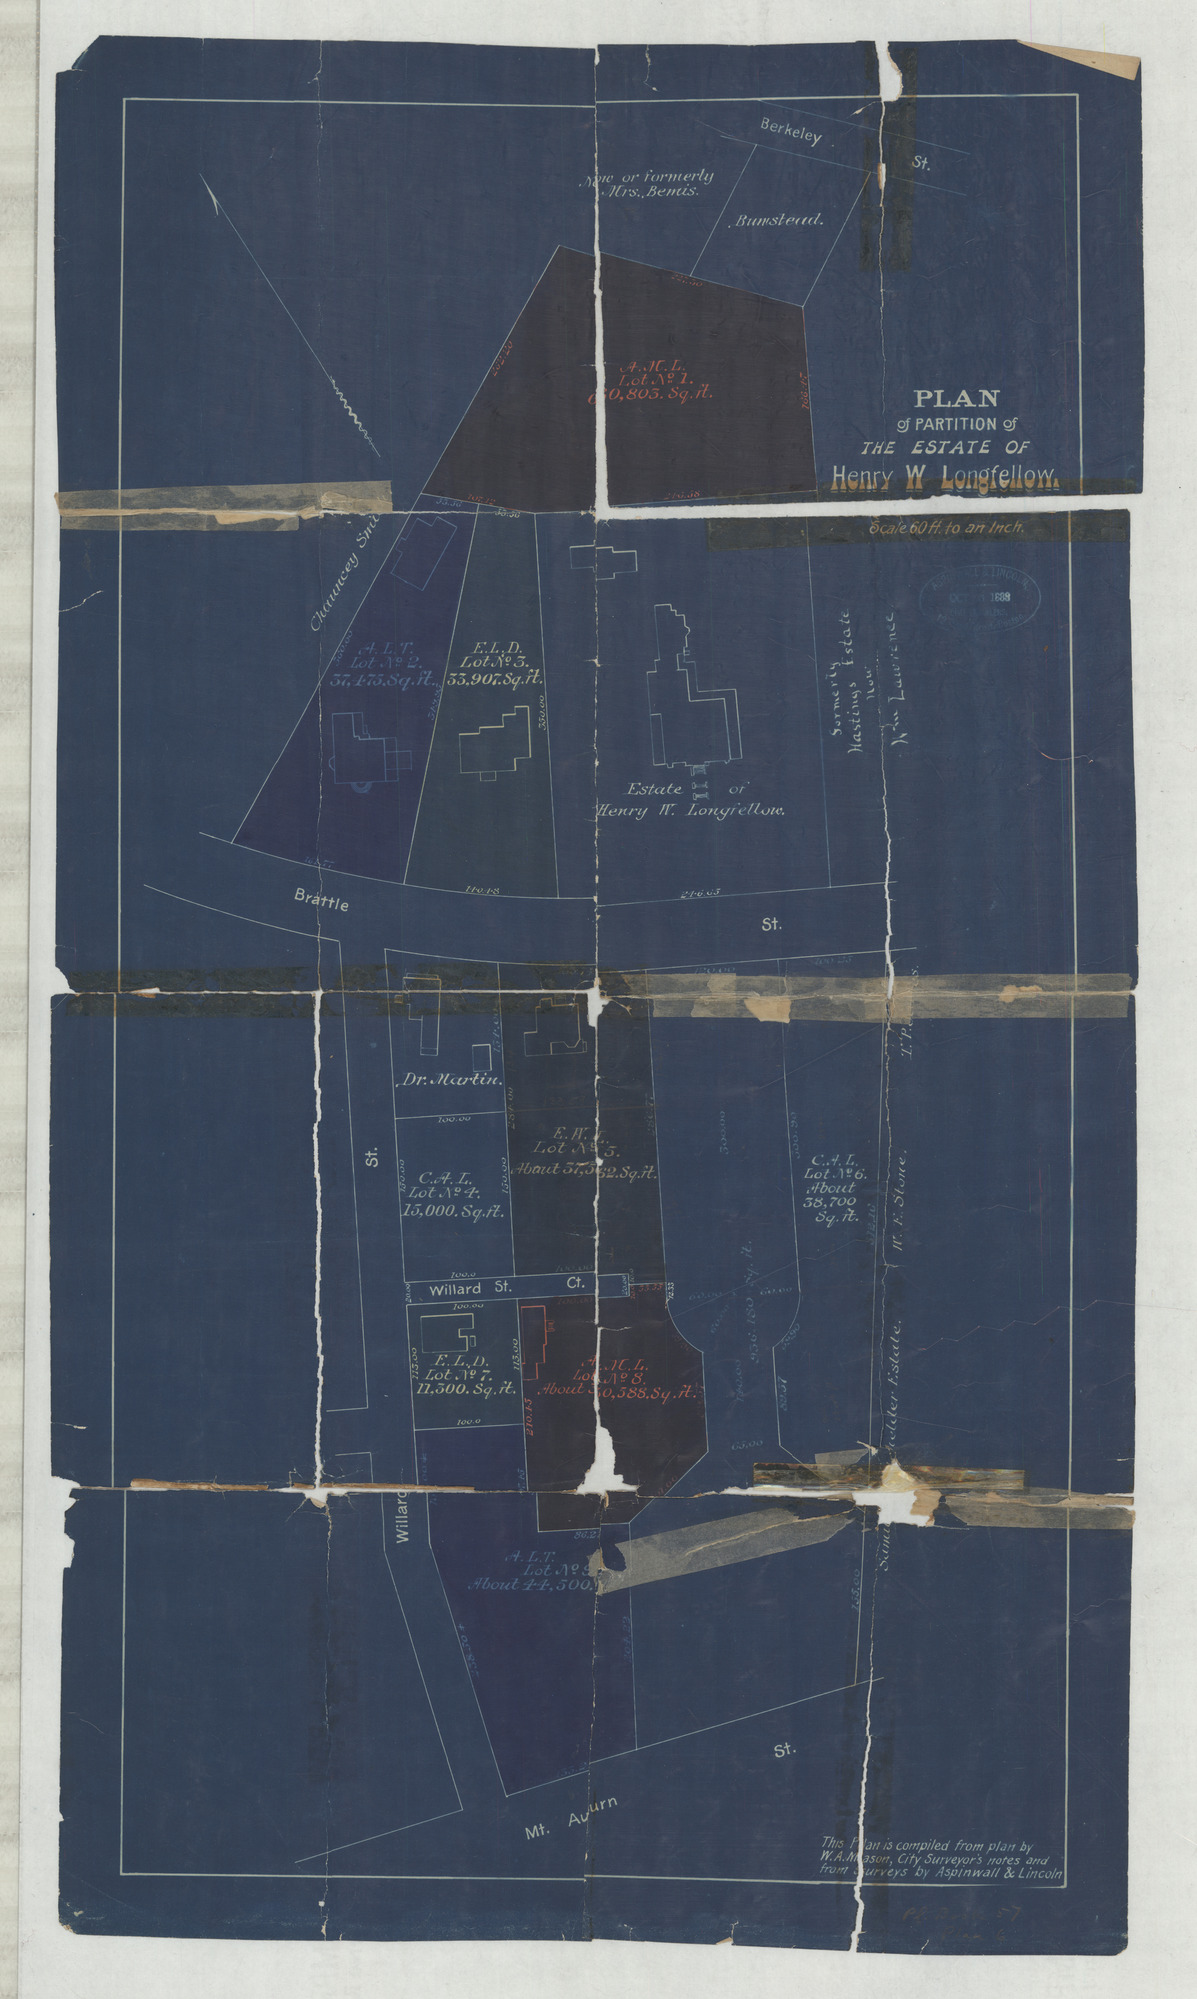 Ripped and damaged blueprint with sections indicating each lot's acronym, number, square footage, and measurements